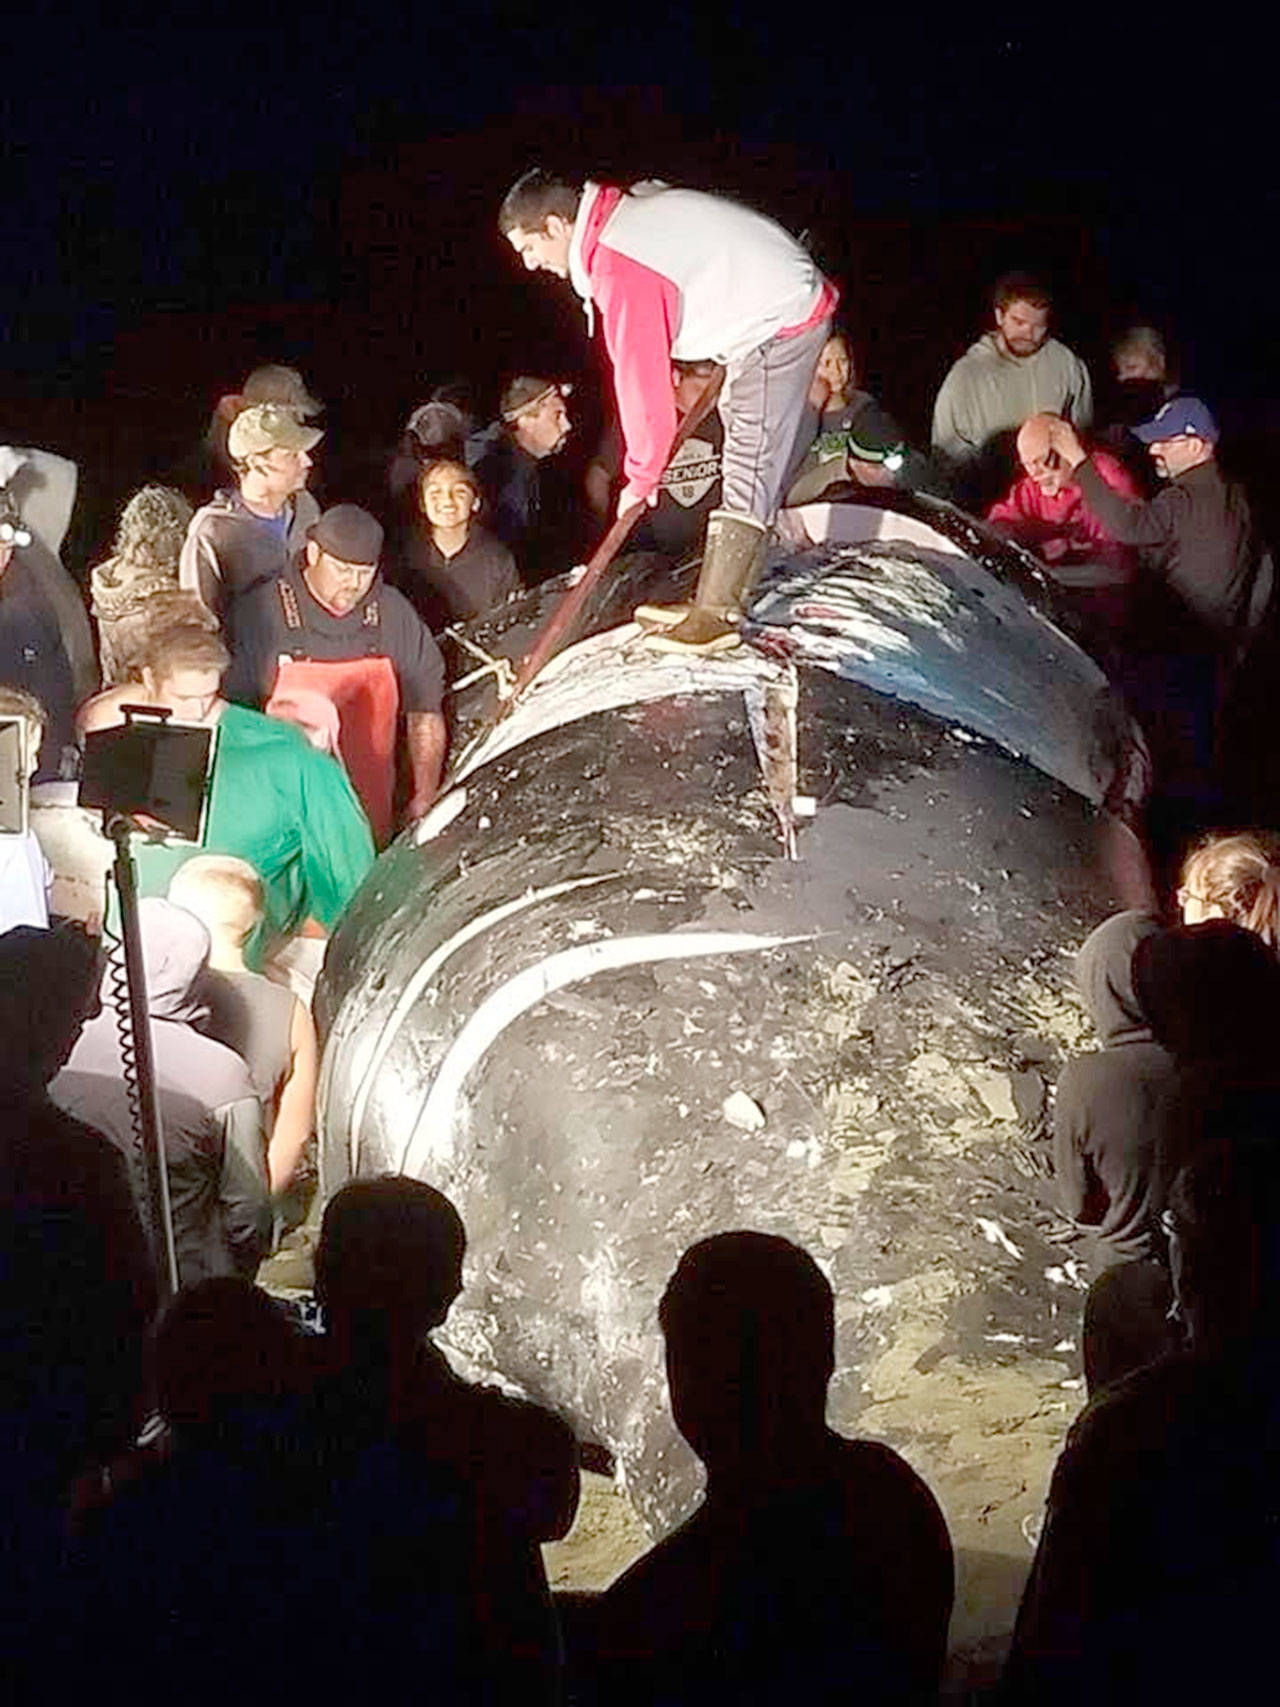 Makah Tribe members gather around the deceased humpback whale, which they towed from Sekiu to Neah Bay on Friday. It was butchered for tribal members.